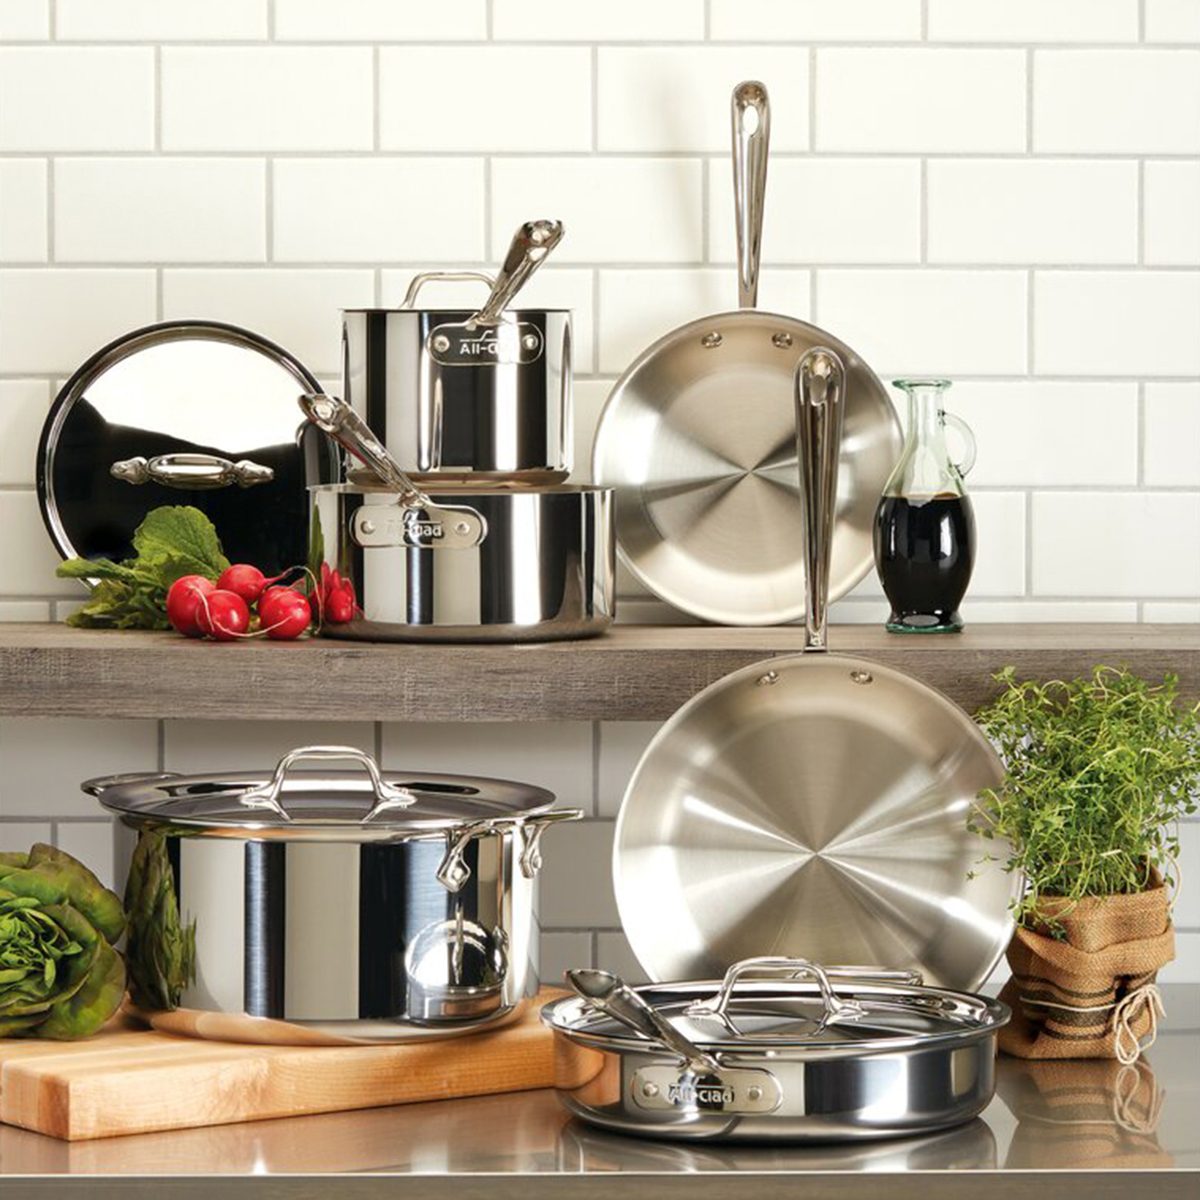 https://www.tasteofhome.com/wp-content/uploads/2021/06/all-clad-d3-stainless-10-piece-stainless-steel-cookware-set.jpg